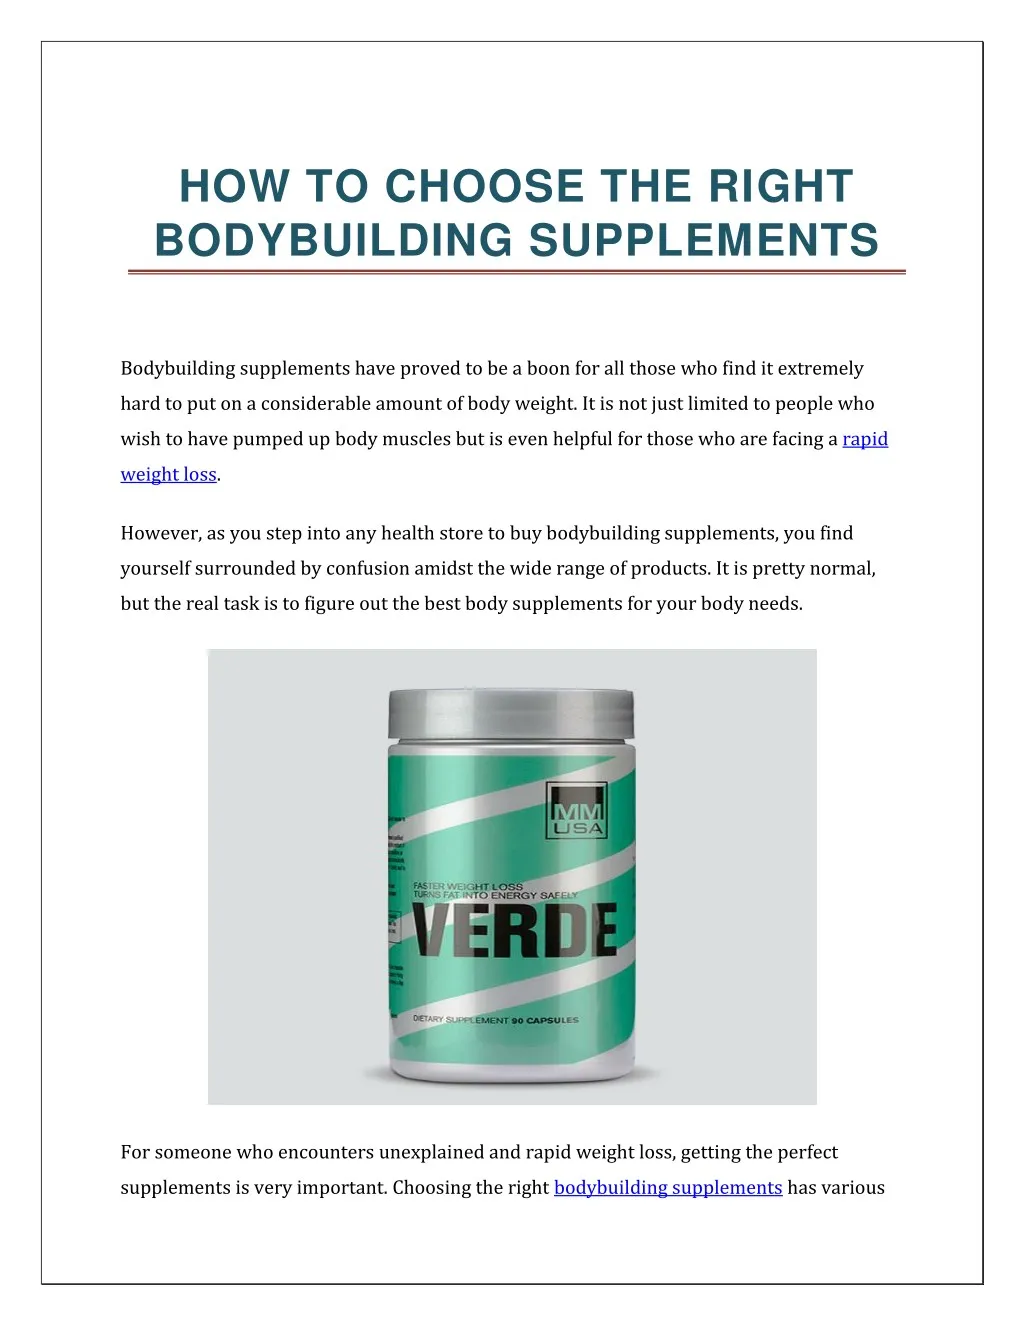 how to choose the right bodybuilding supplements